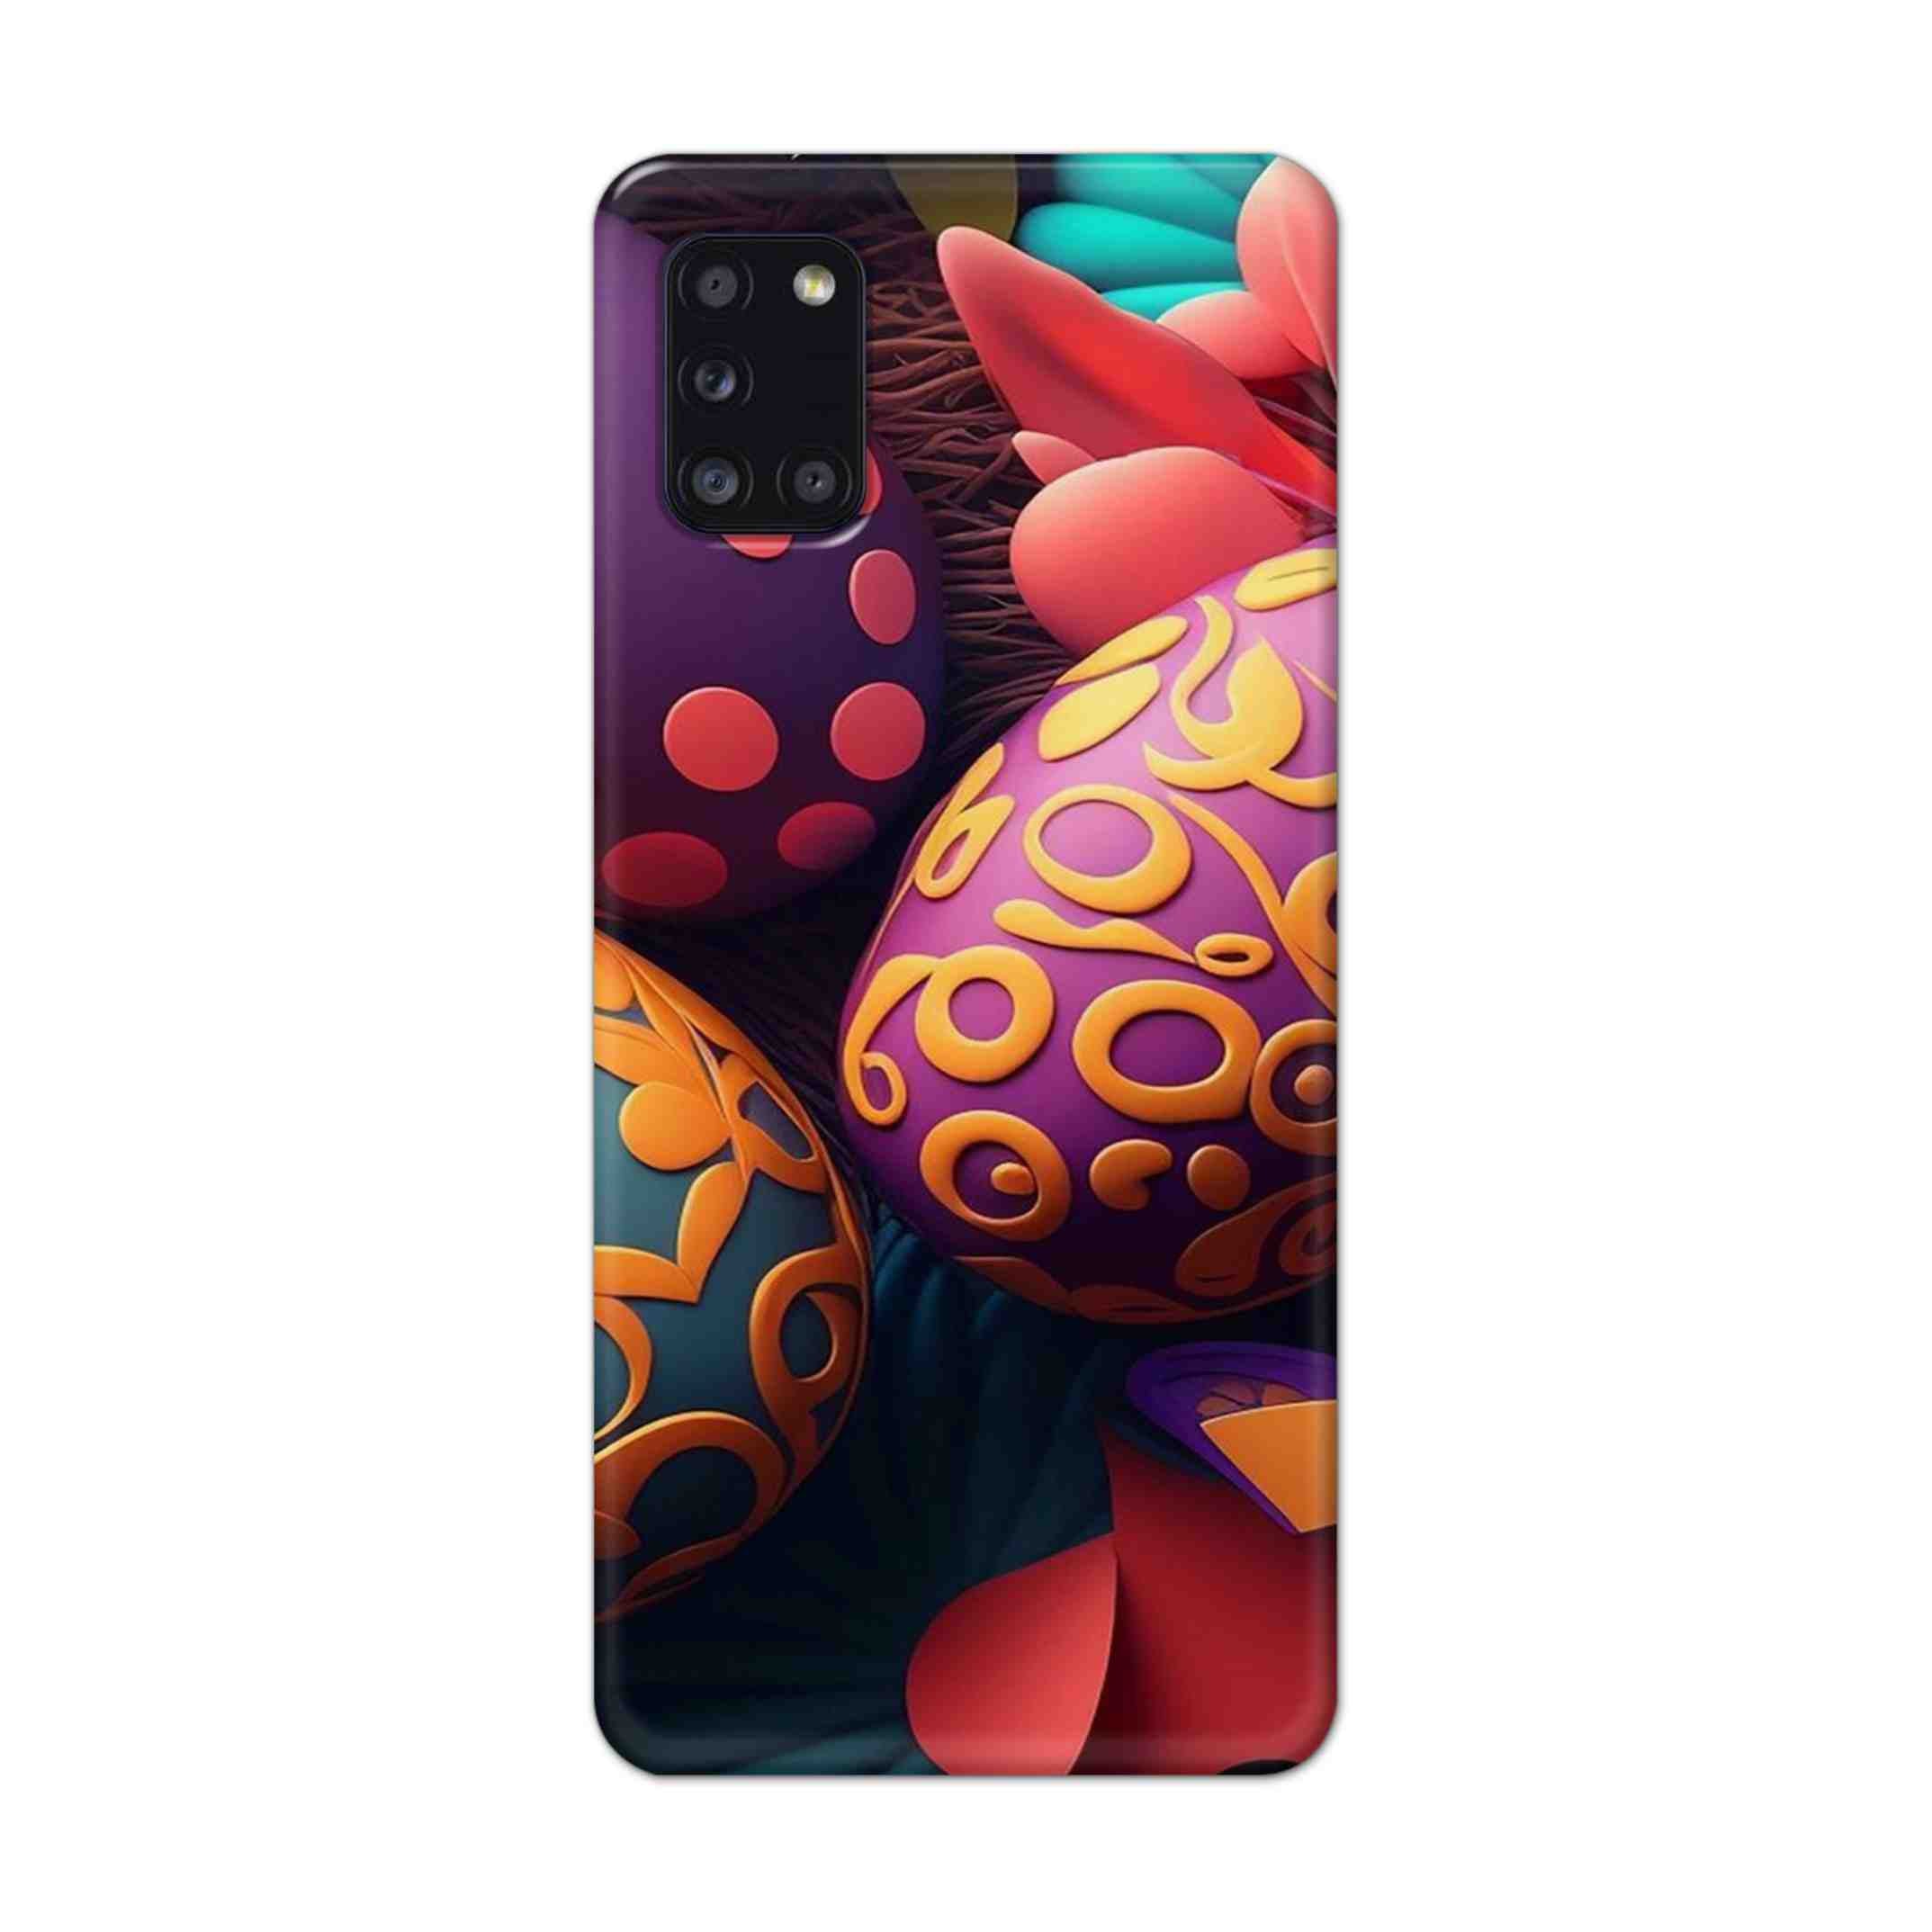 Buy Easter Egg Hard Back Mobile Phone Case Cover For Samsung Galaxy A31 Online